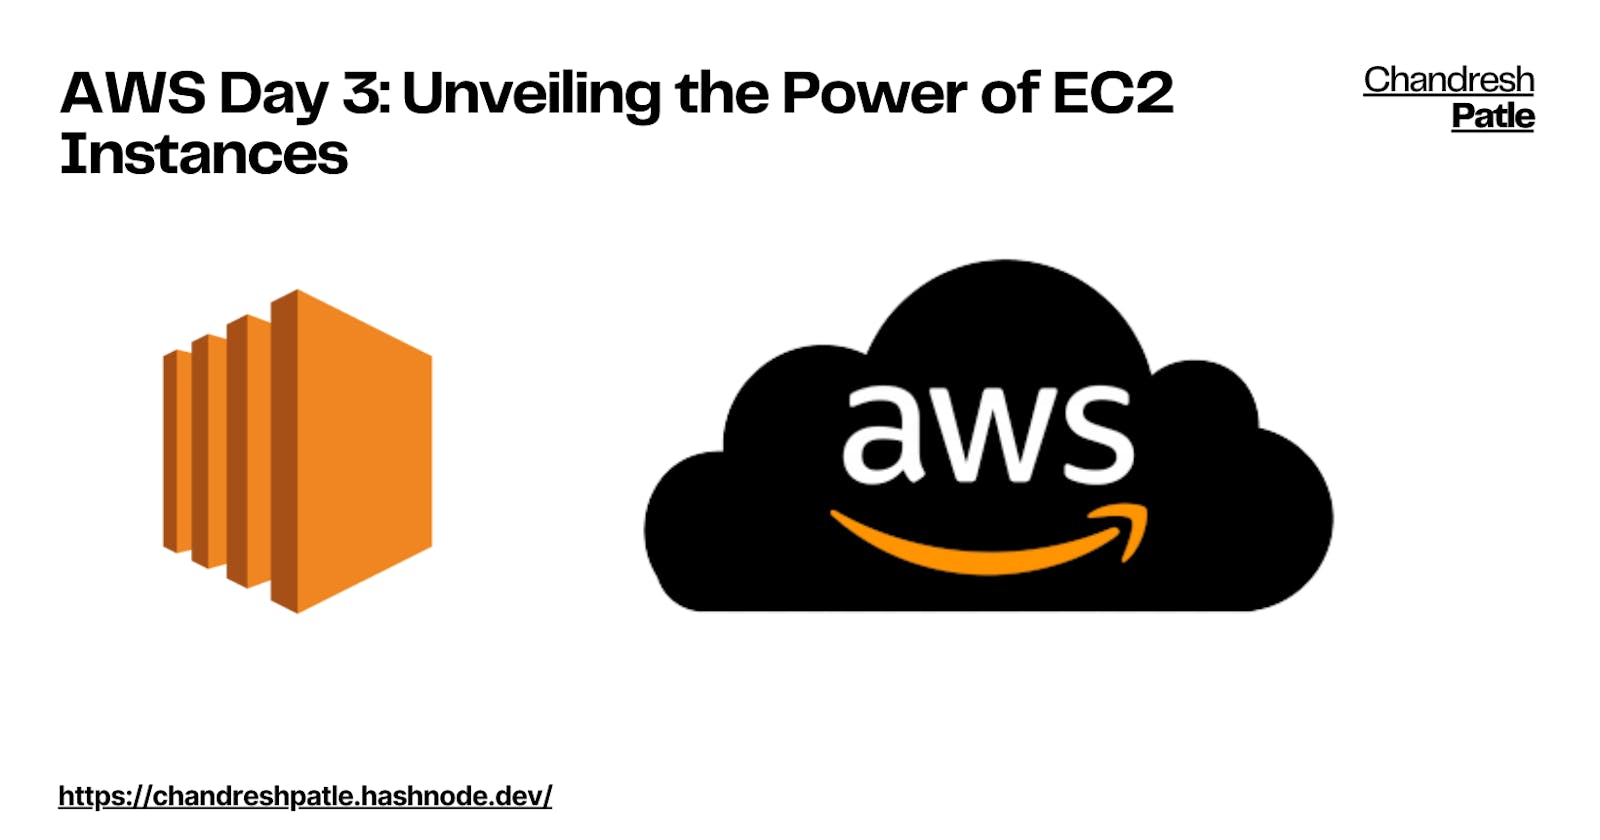 AWS Day 3: Unveiling the Power of EC2 Instances